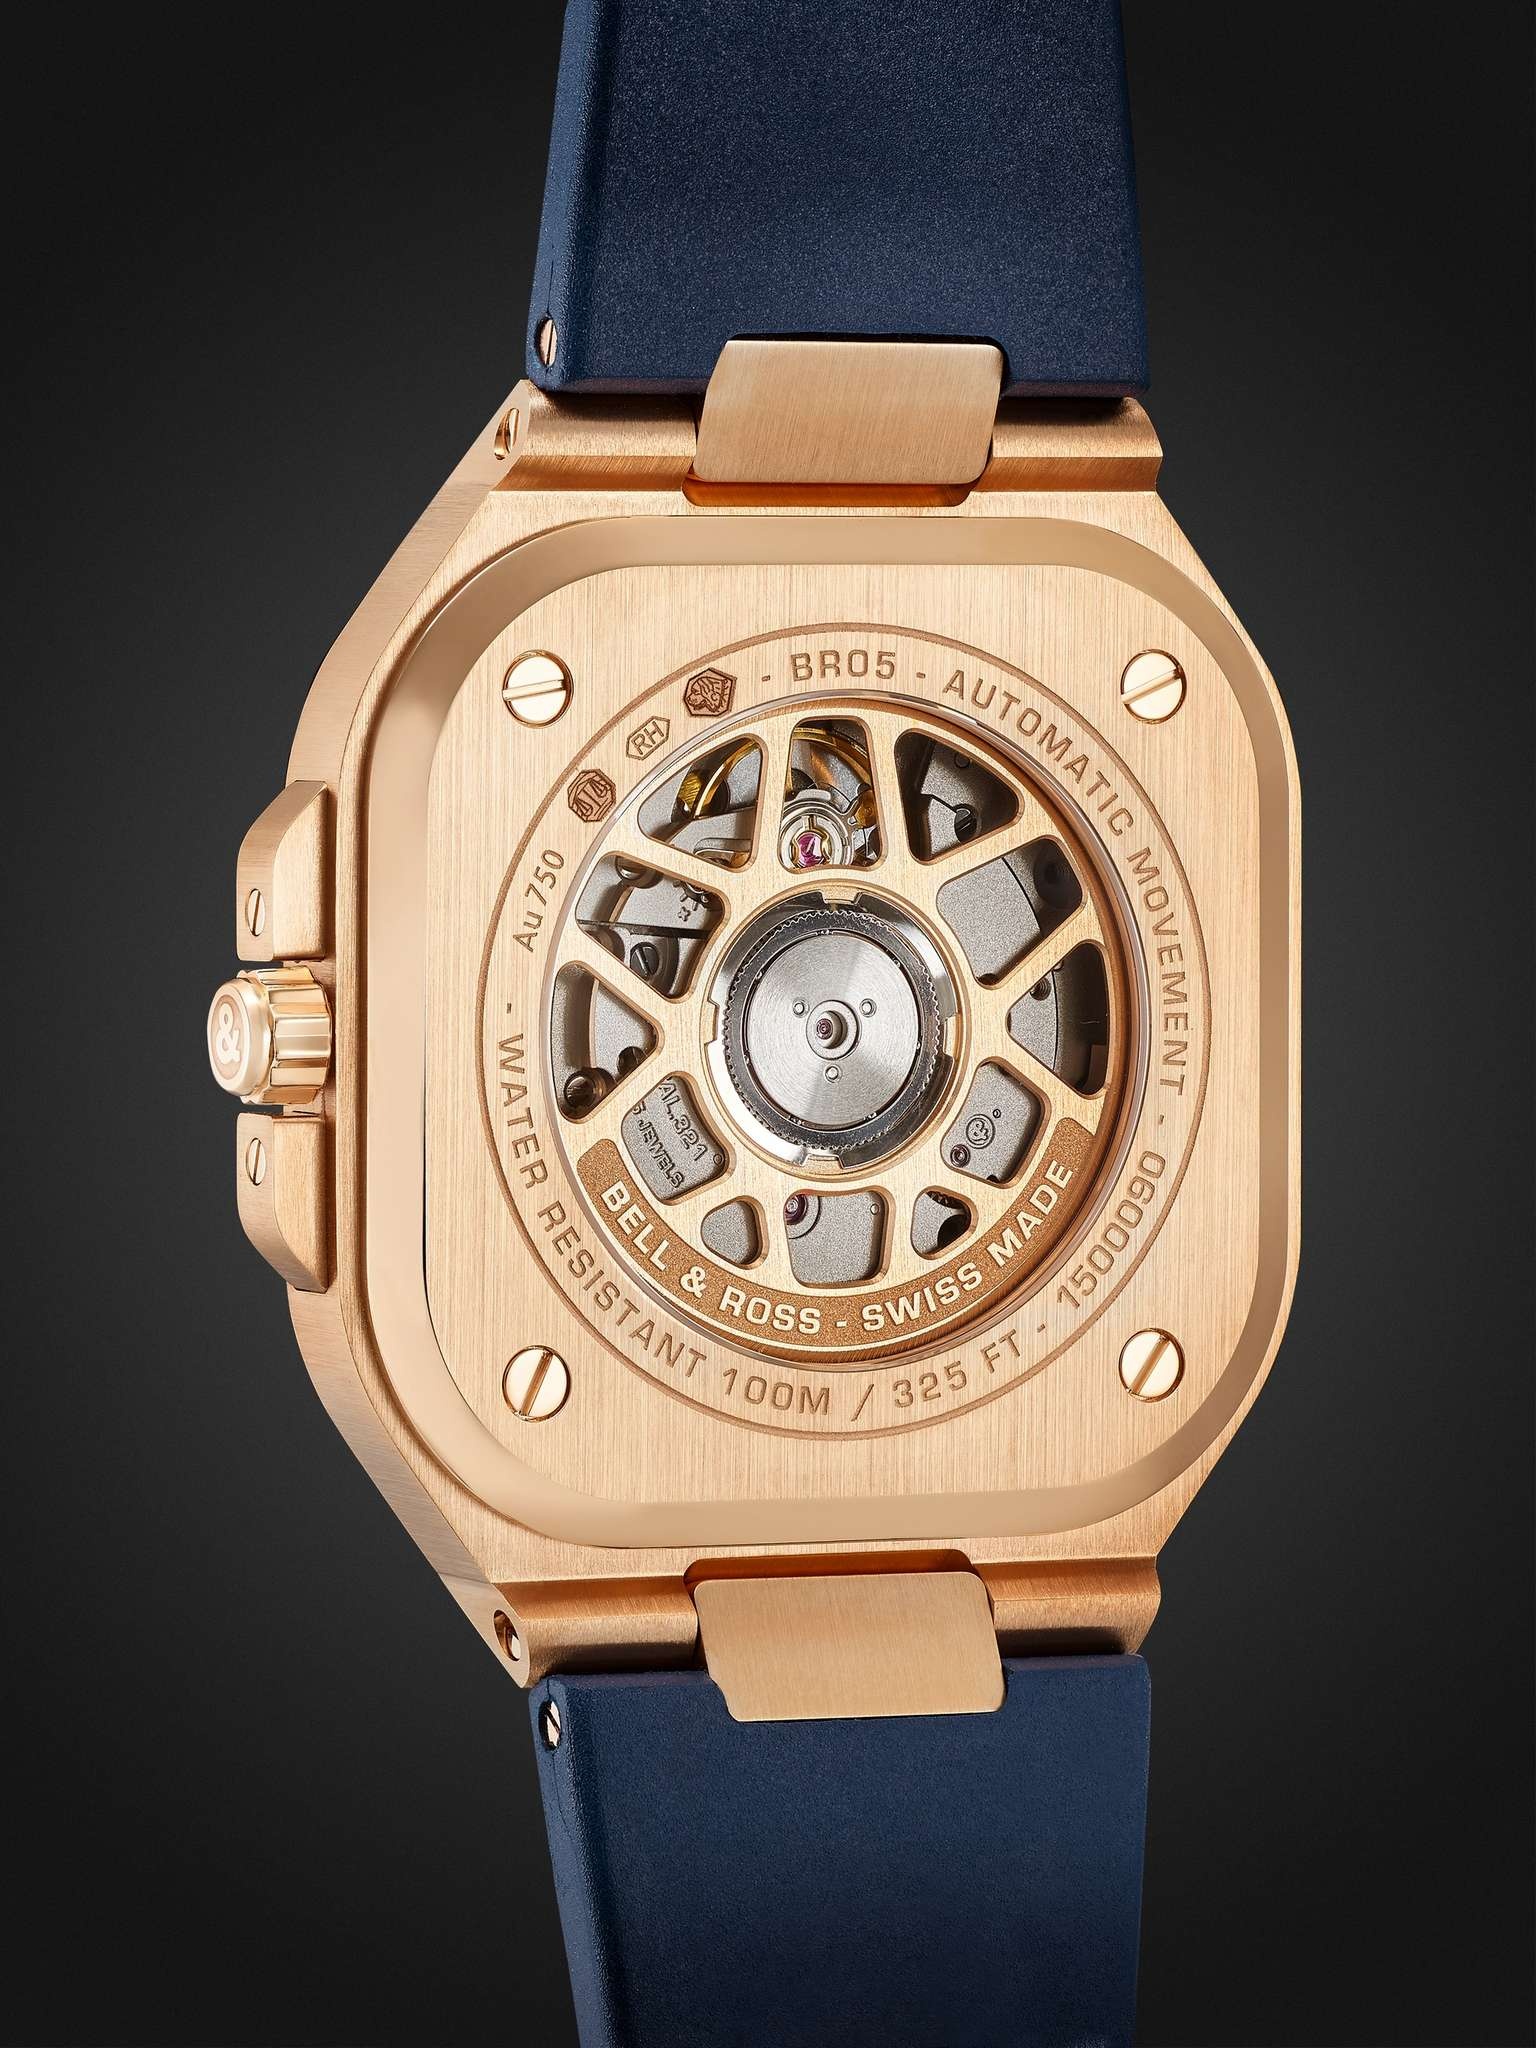 BR 05 Blue Gold Automatic 40mm 18-Karat Rose Gold and Rubber Watch, Ref. No. BR05A-BLU-PG/SRB - 5